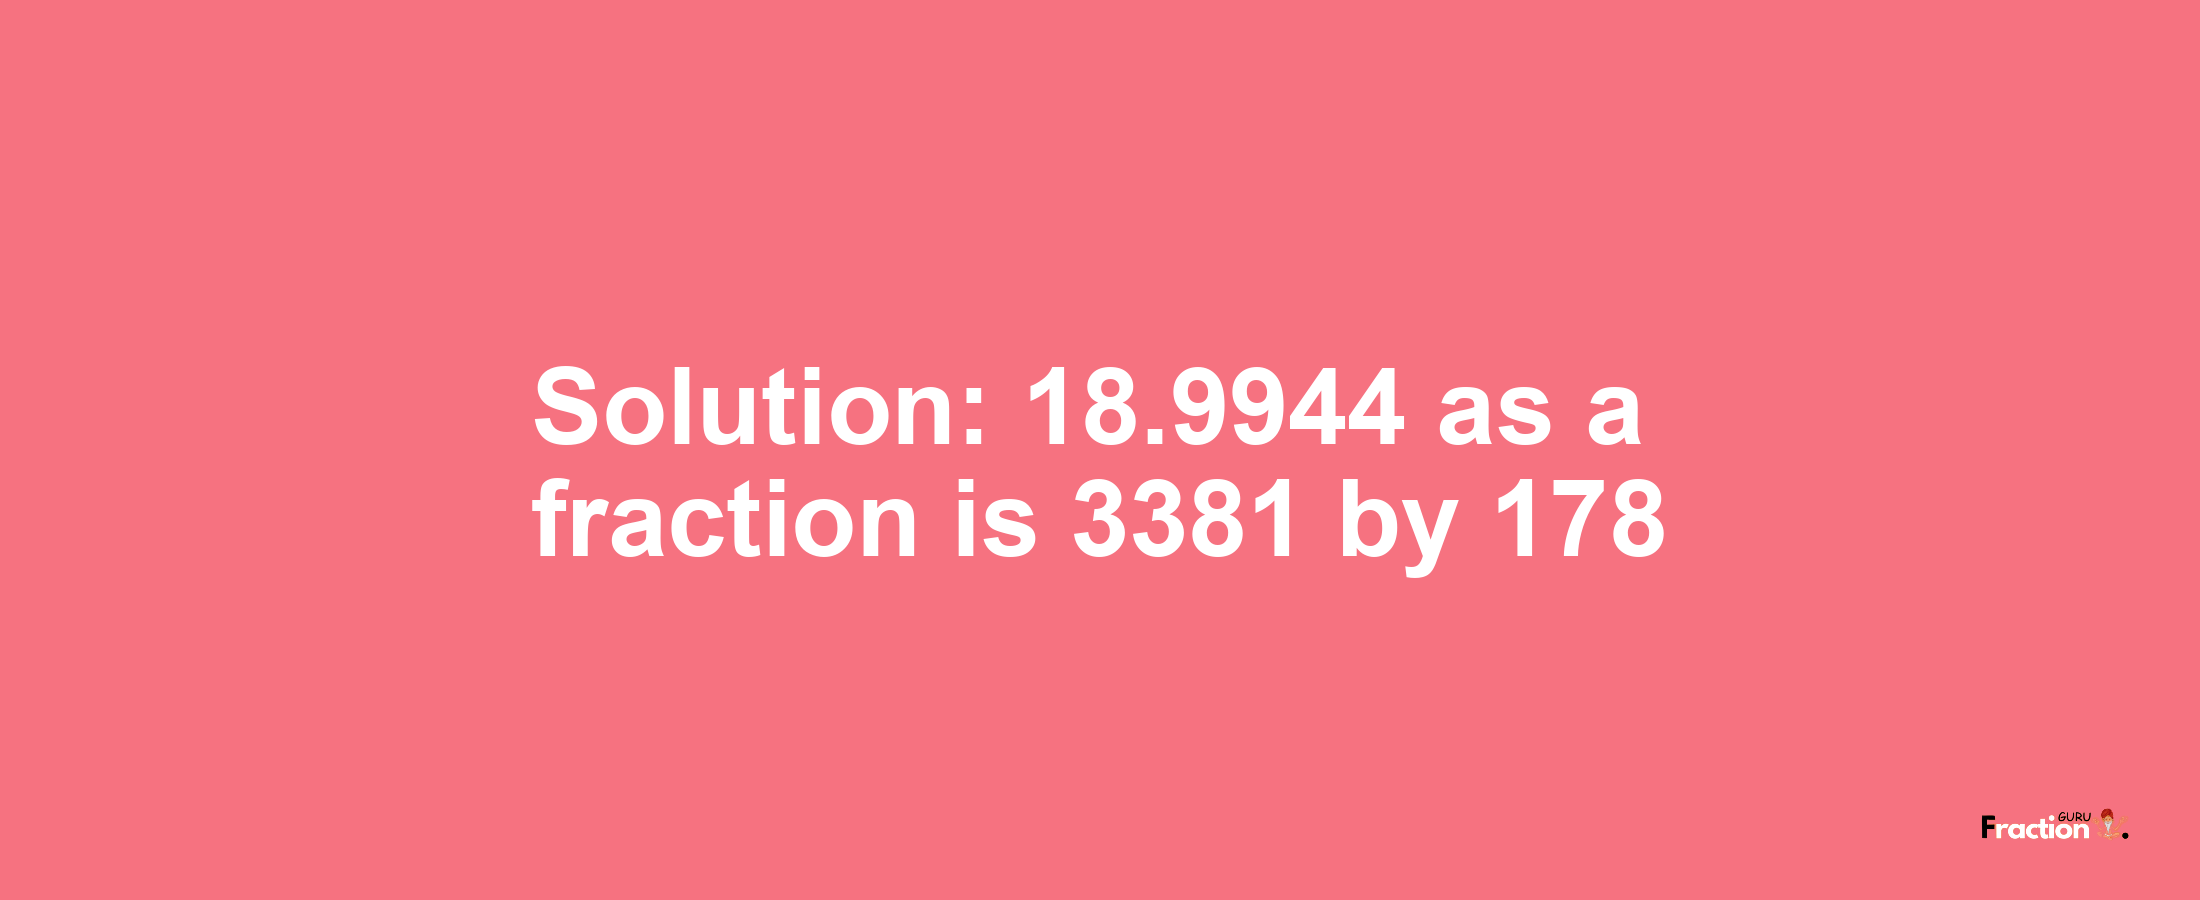 Solution:18.9944 as a fraction is 3381/178